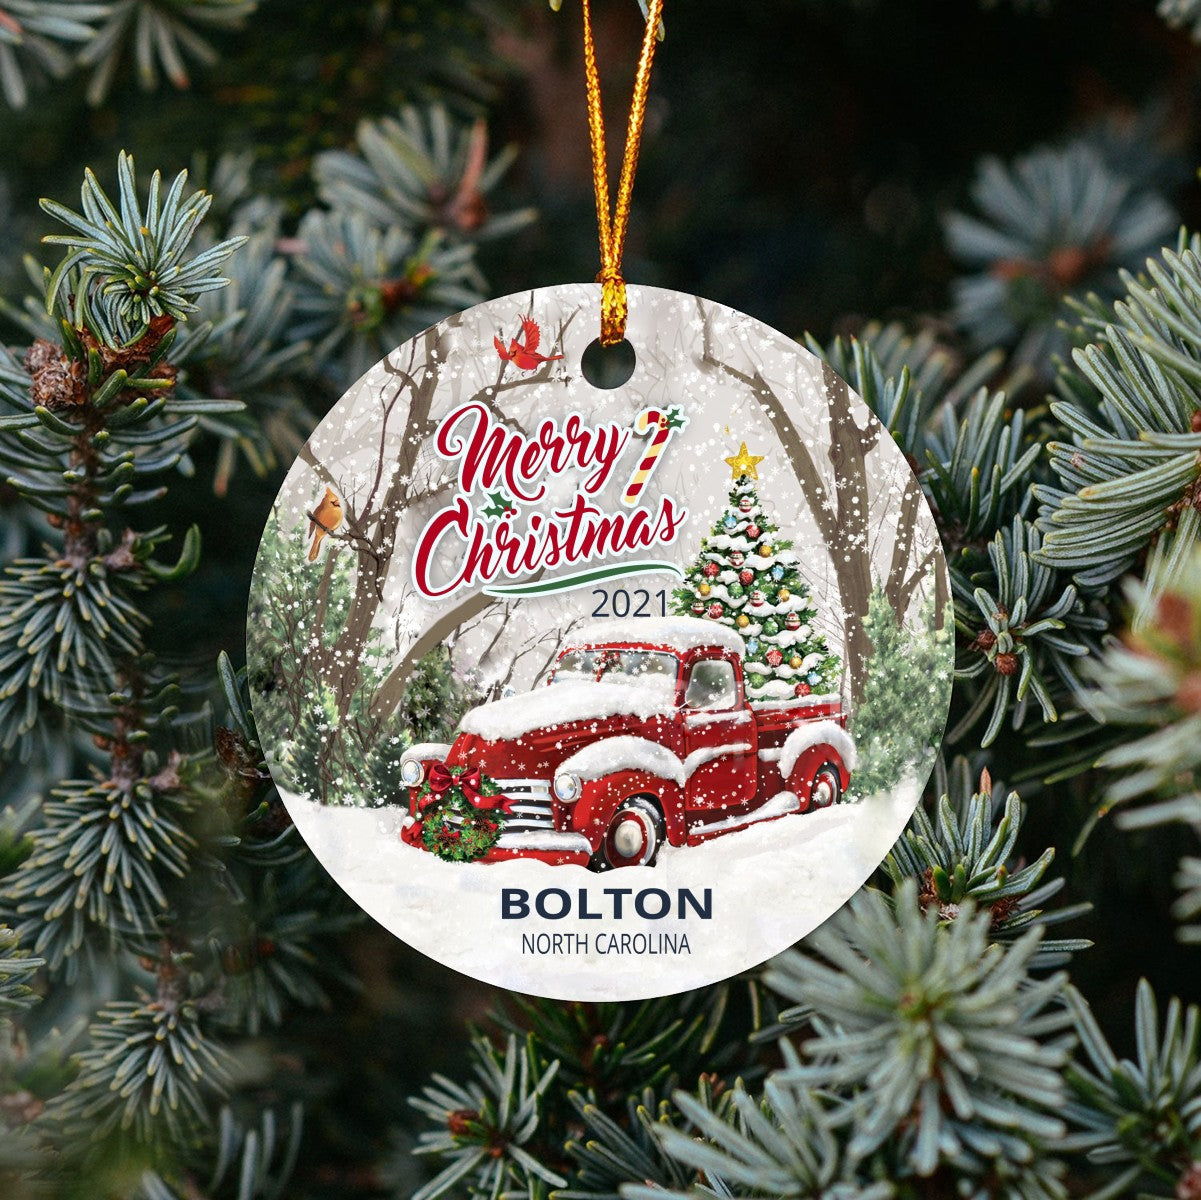 Christmas Tree Ornaments Bolton - Ornament With Name City, State Bolton North Carolina NC Ornament - Red Truck Xmas Ornaments 3'' Plastic Gift For Family, Friend And Housewarming